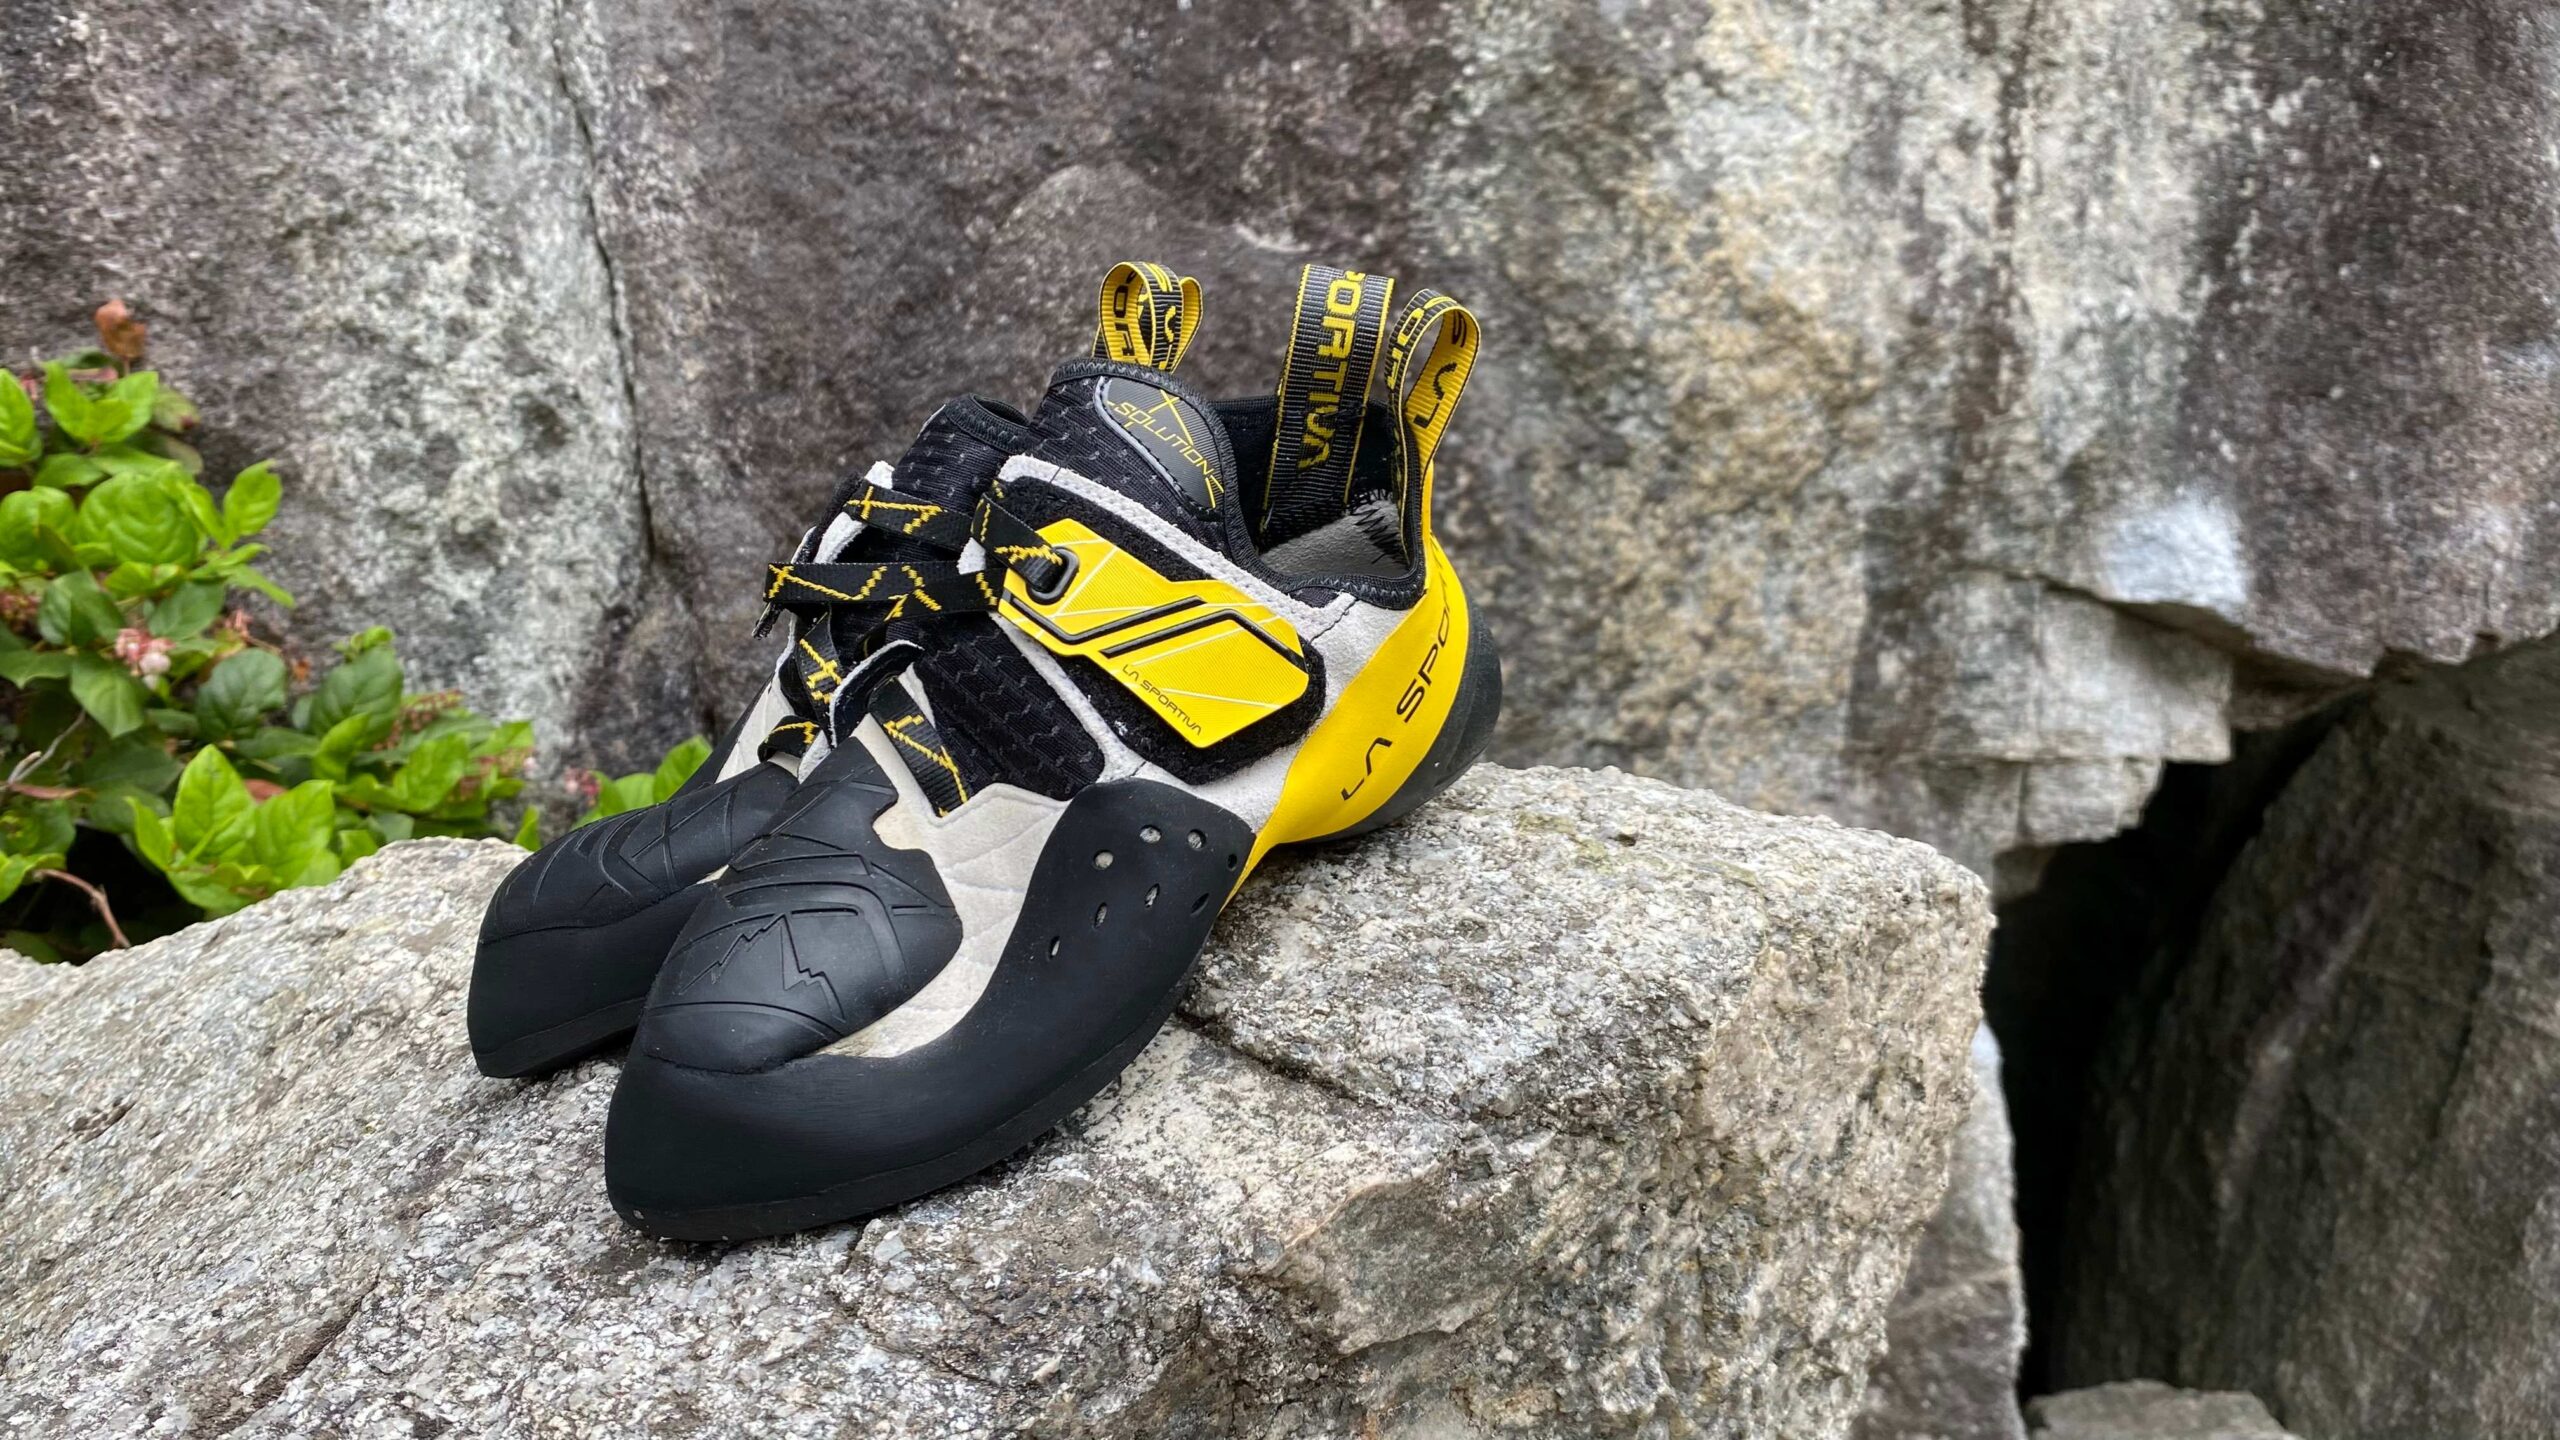 The Olympian - La Sportiva's Solution Comp - Gripped Magazine